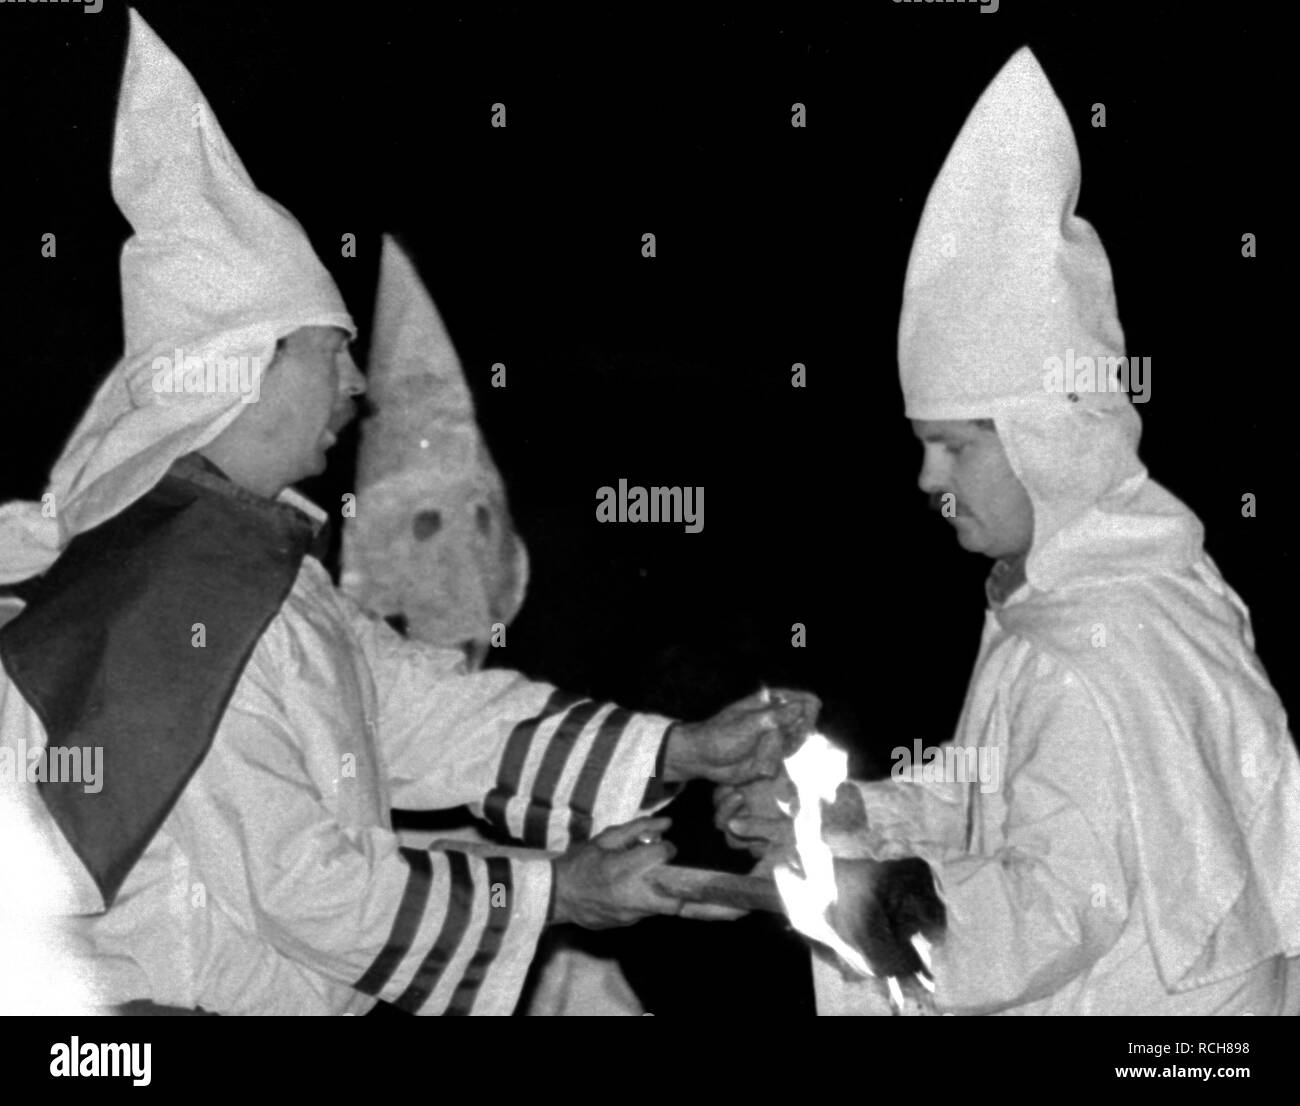 A Members of the KKK prepare to cross lighting in Rumford Me during rally in the small town Maine town. The Klan had been active in Maine in the 1920's and 30's , This group of Klansmen openly invited the press to observe ,photograph and report on this event photo by bill belknap Stock Photo